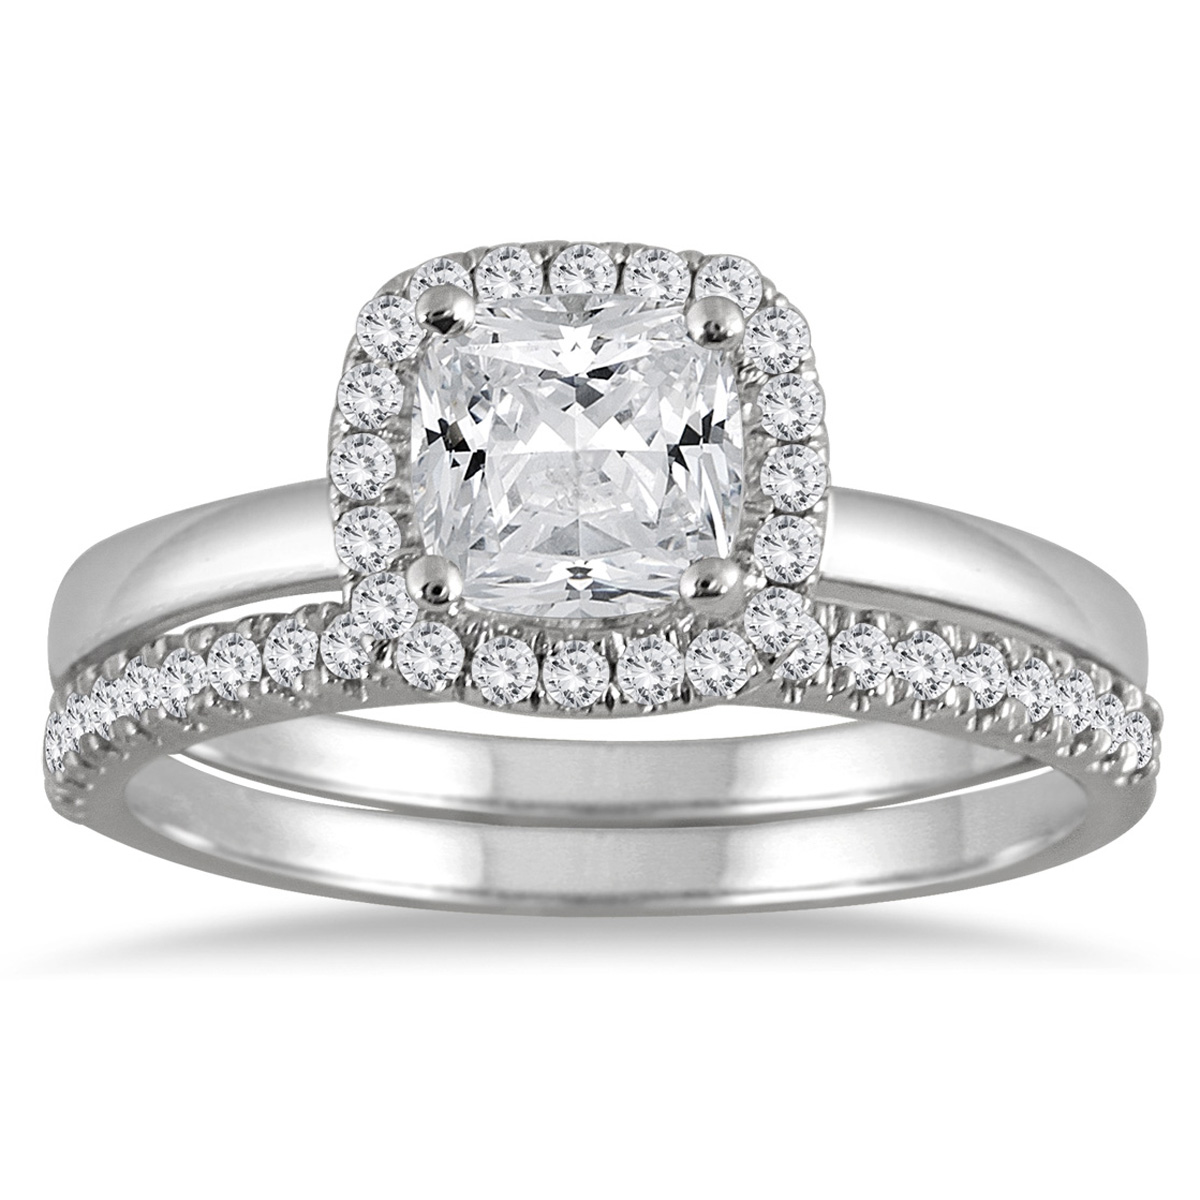 Image of AGS Certified 1 1/4 Carat TW Cushion Cut Diamond Halo Bridal Set in 14K White Gold